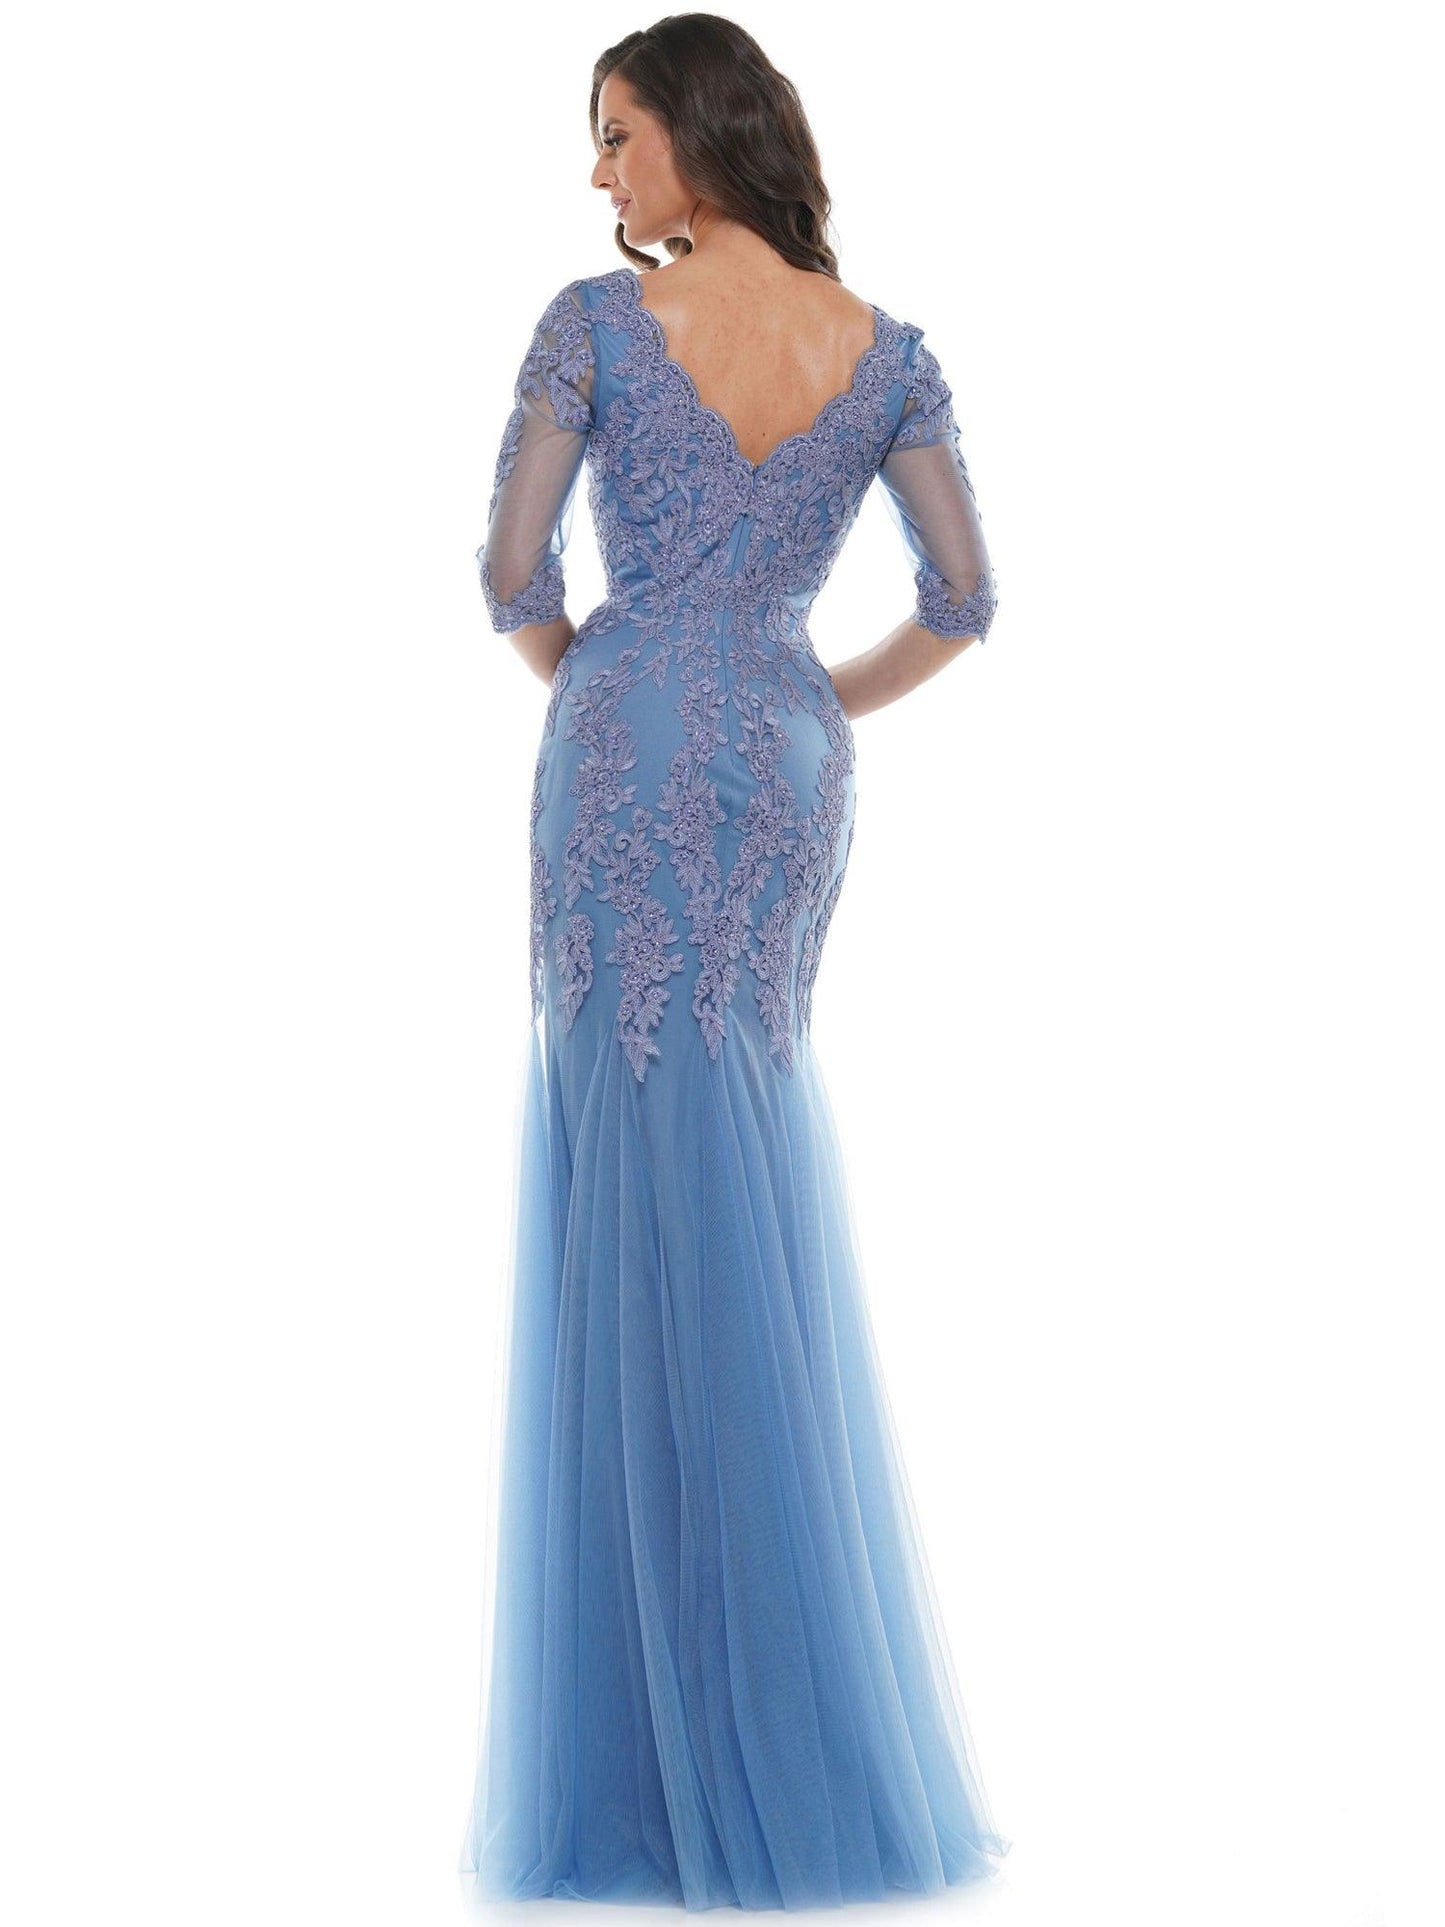 Marsoni Long Mother of the Bride Mermaid Dress 162 - The Dress Outlet